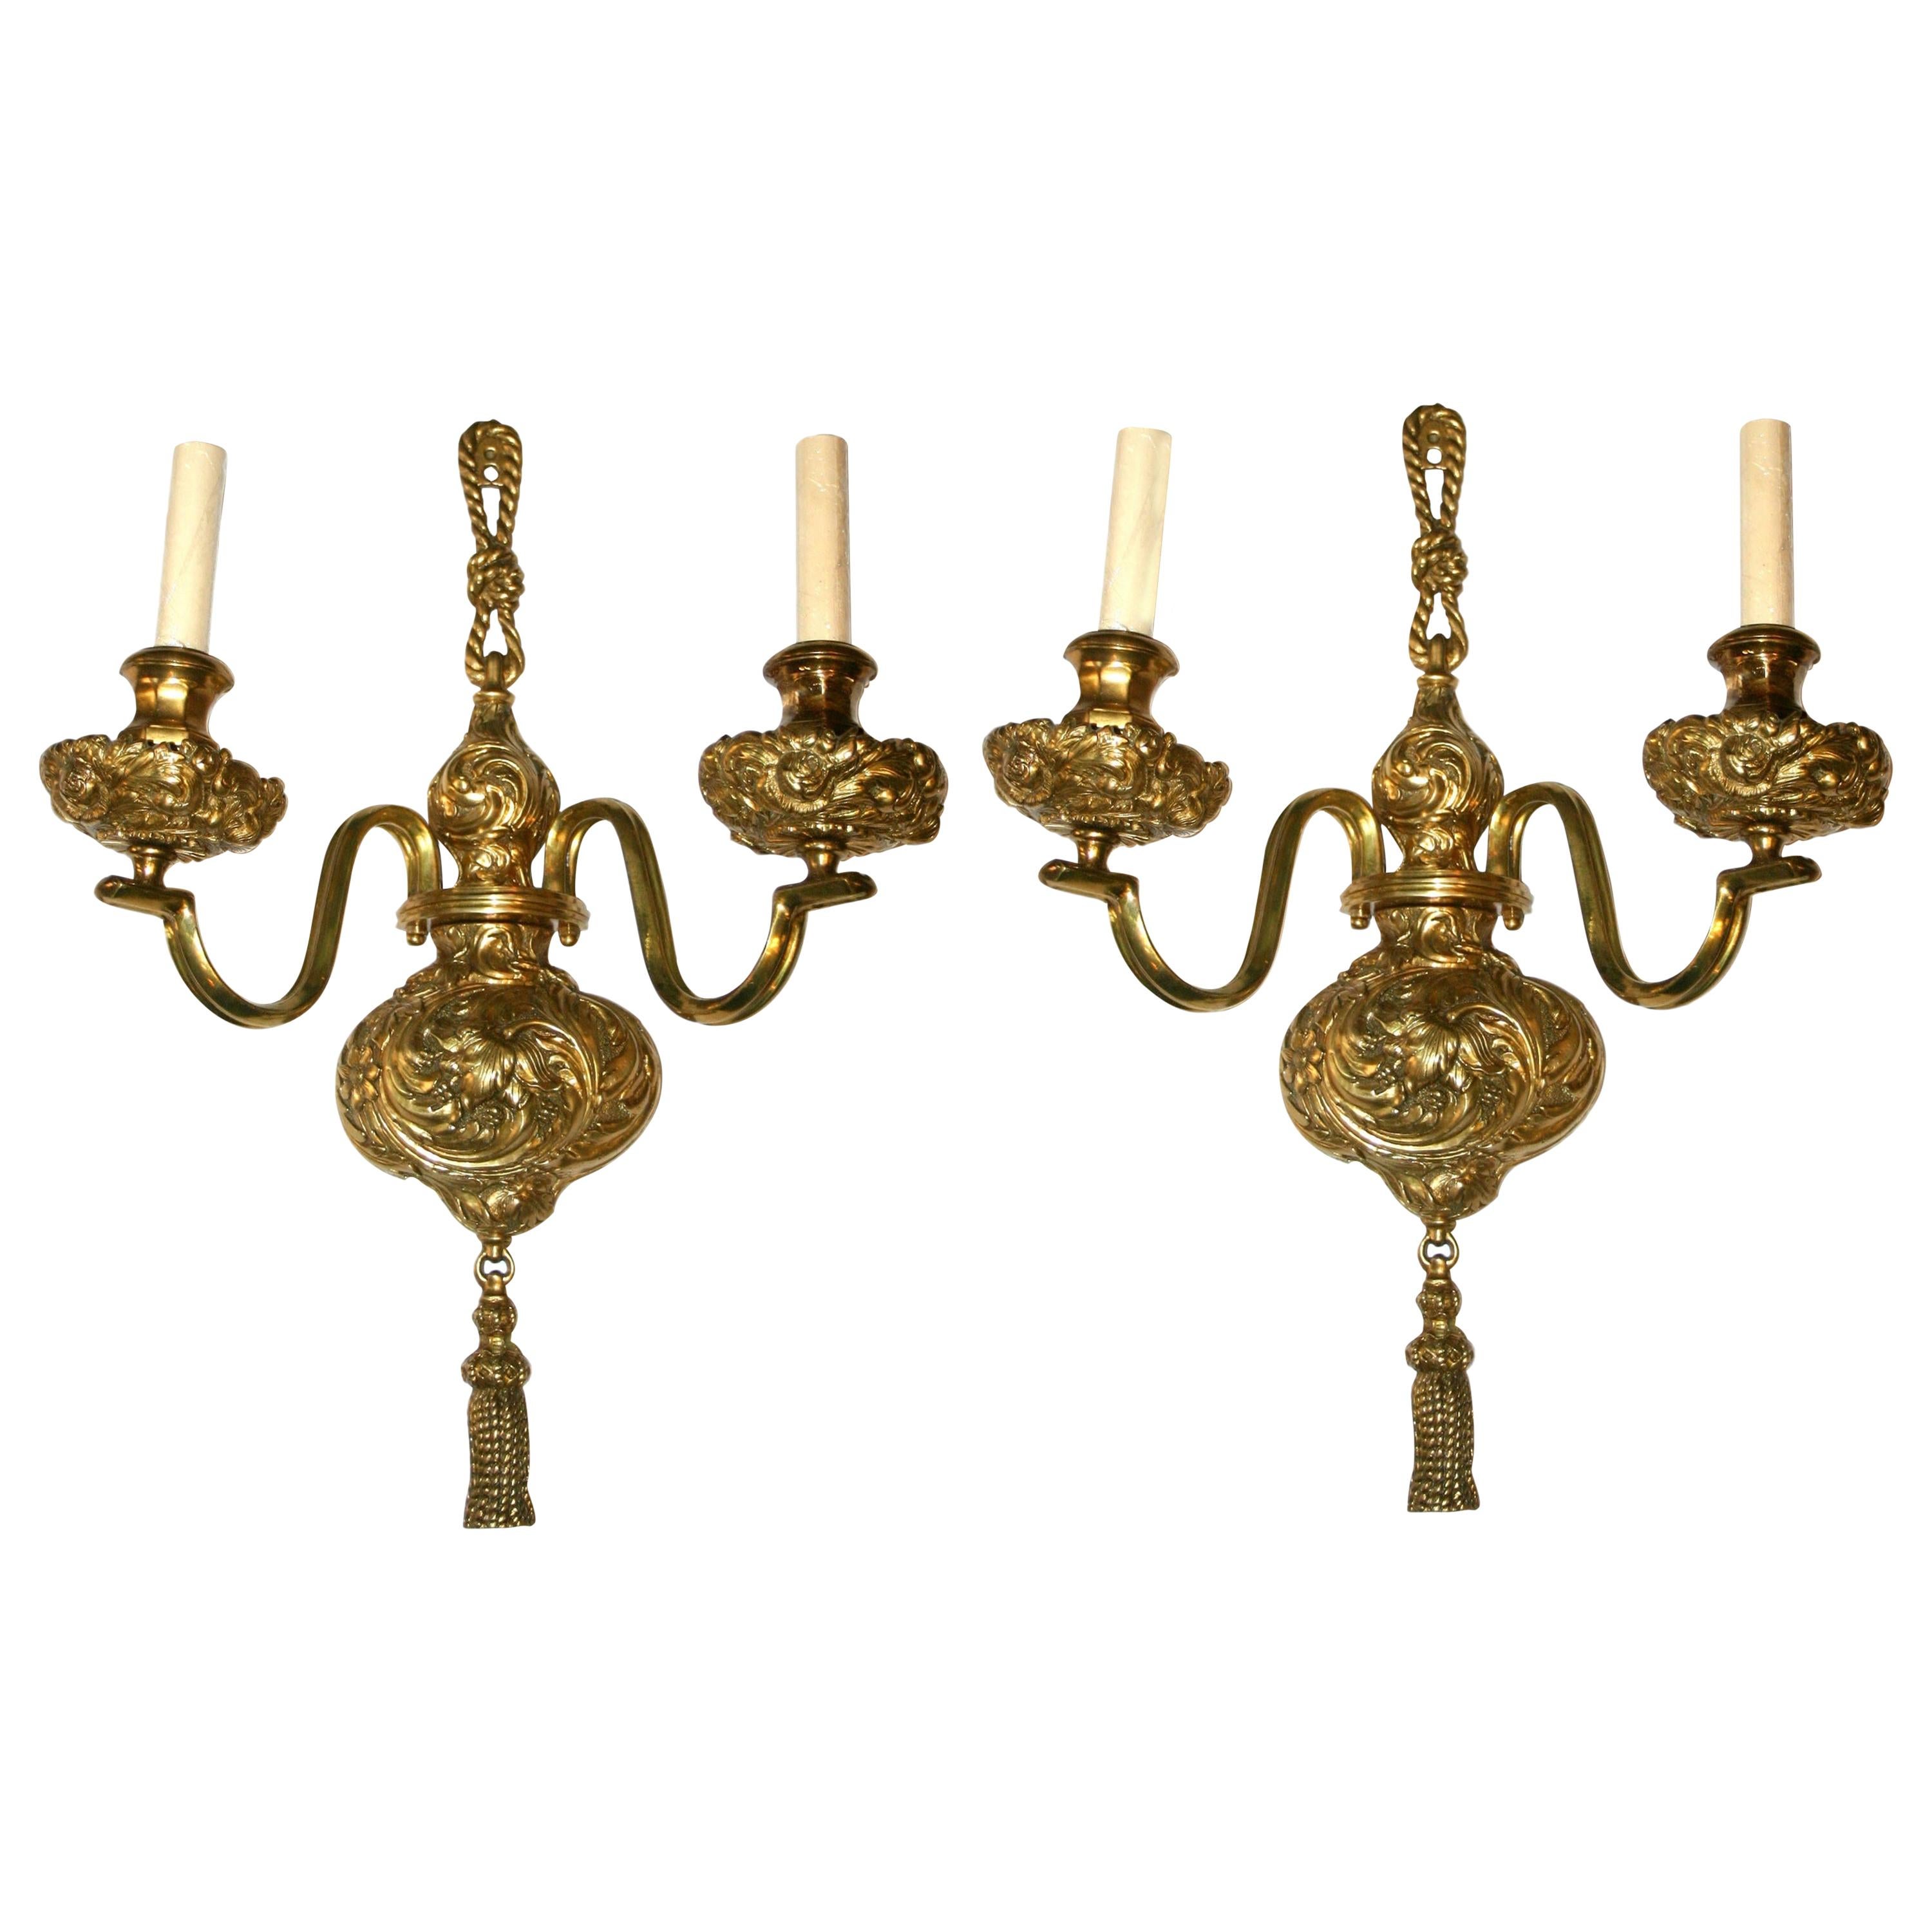 Set of Large Gilt Bronze Sconces, Sold in Pairs